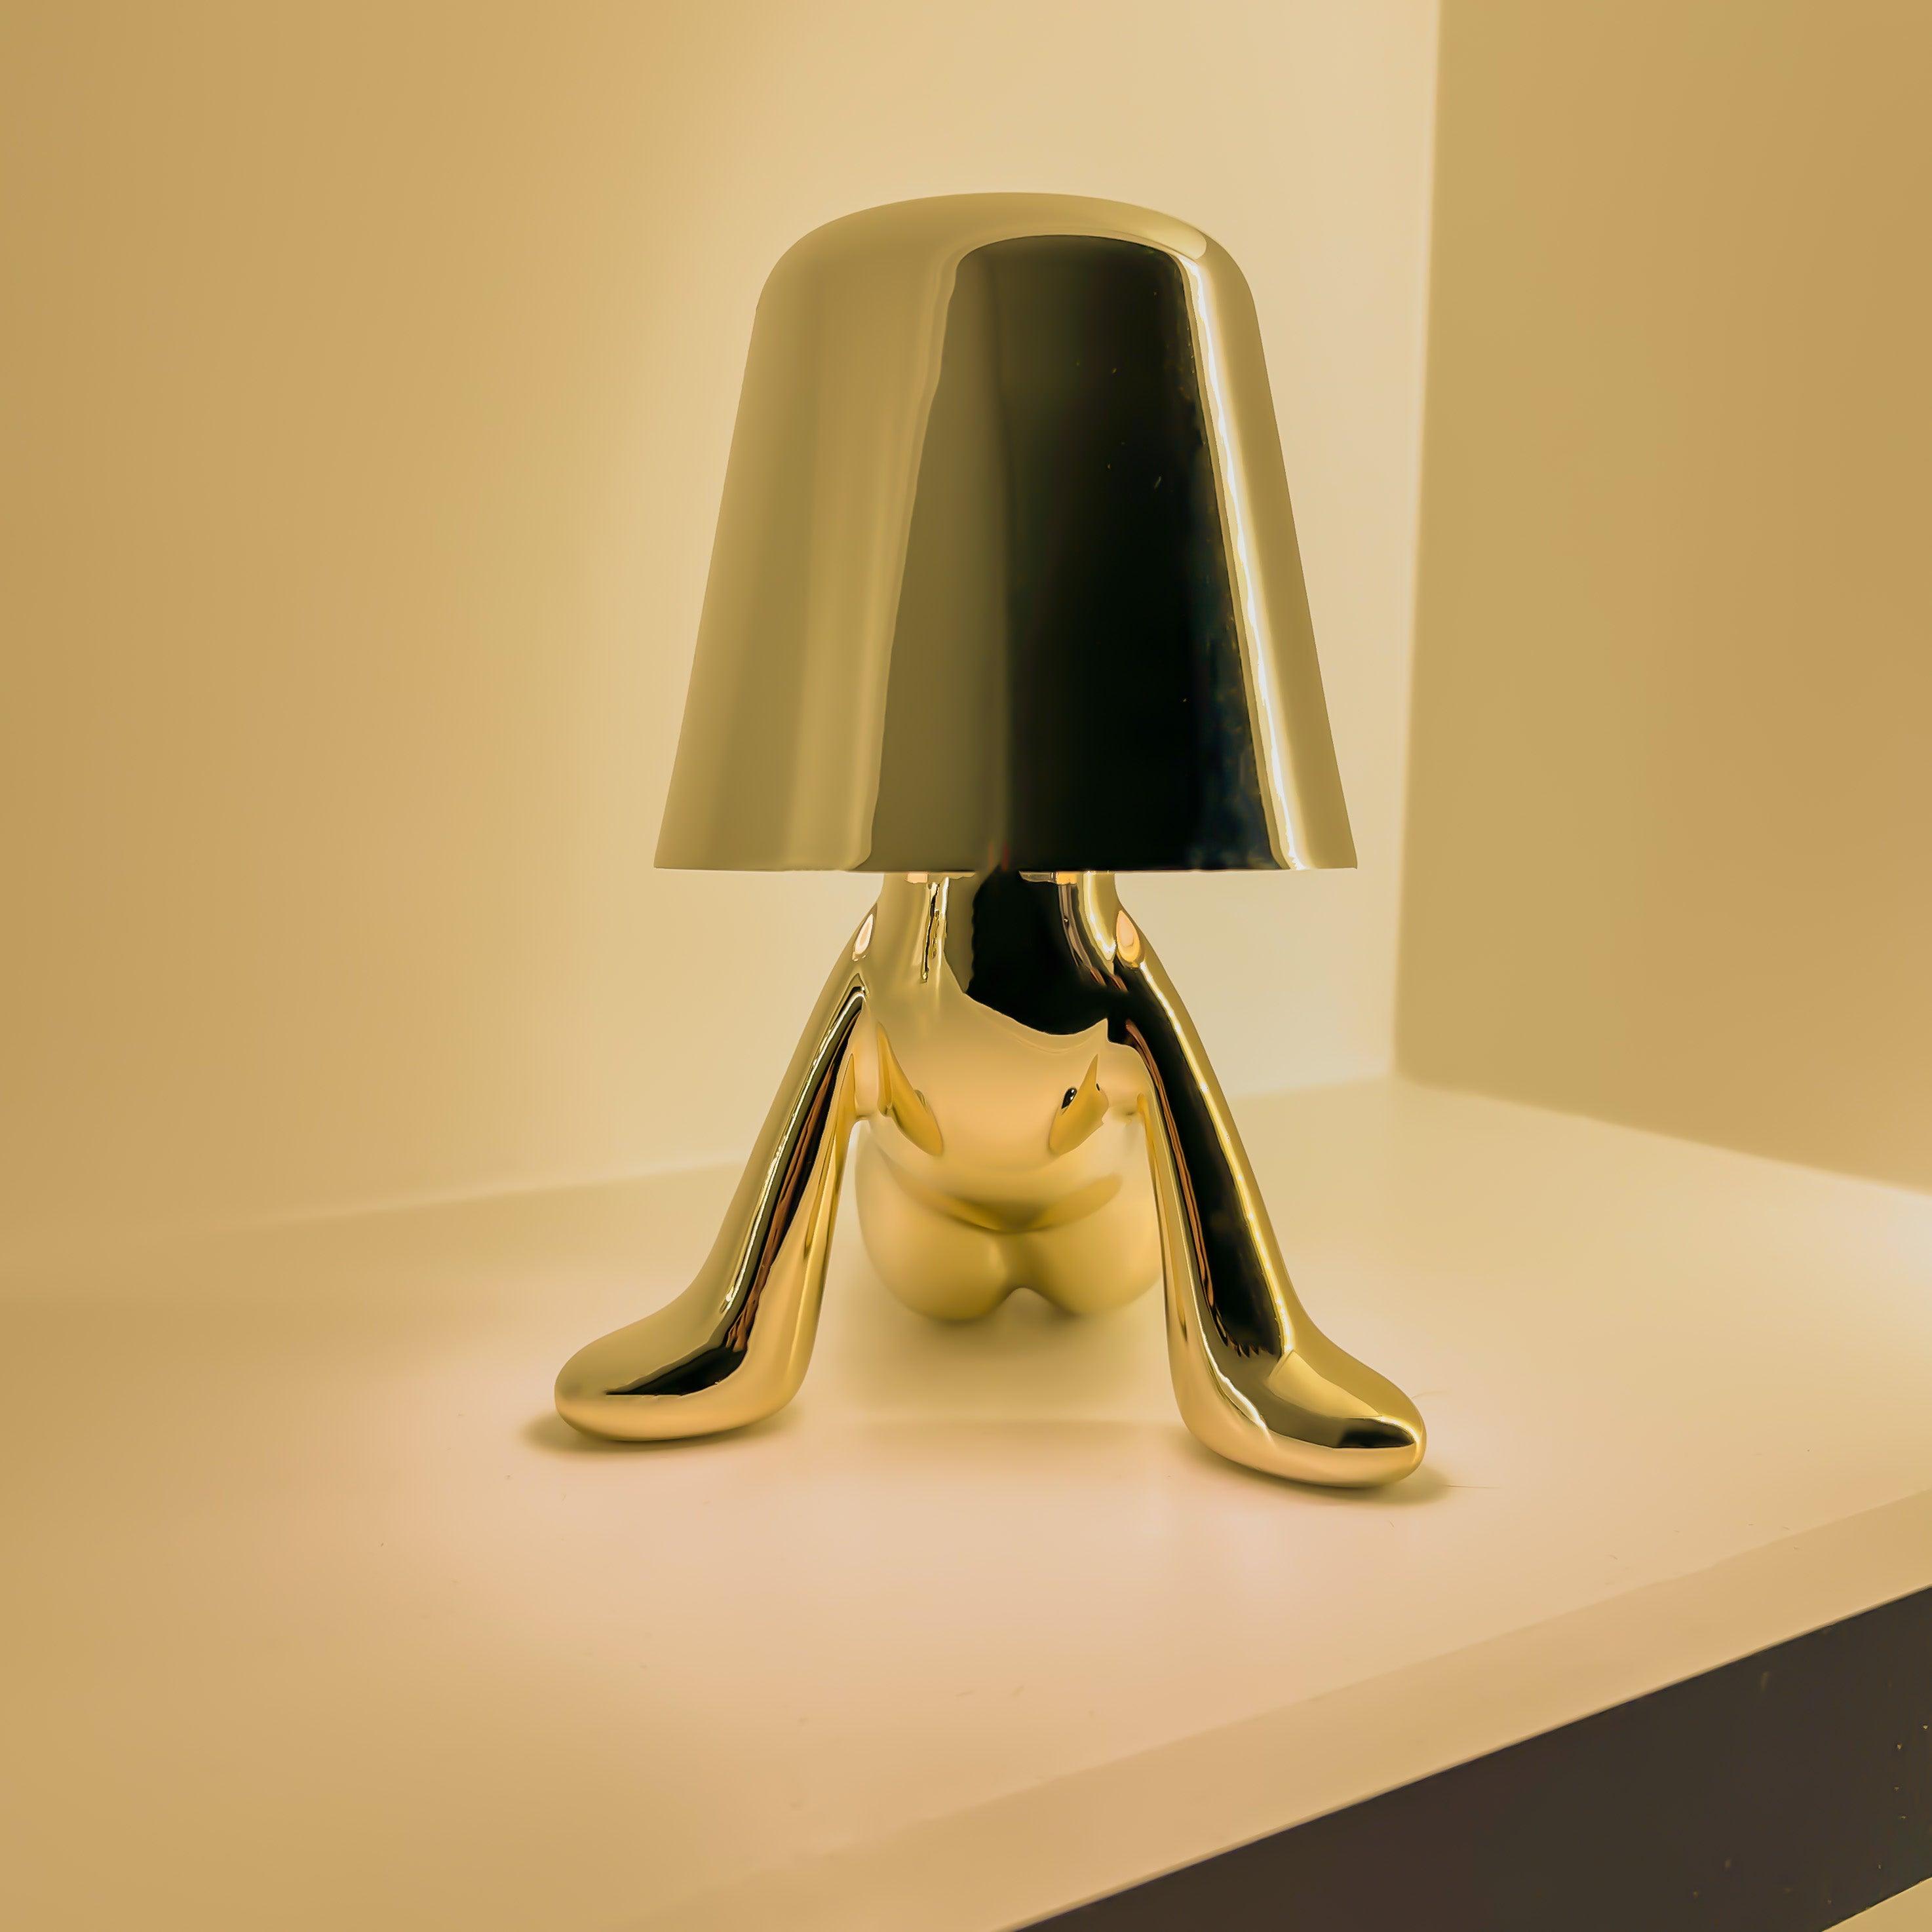 Chilling Brothers - Lamp Collection - Casa Di Lumo